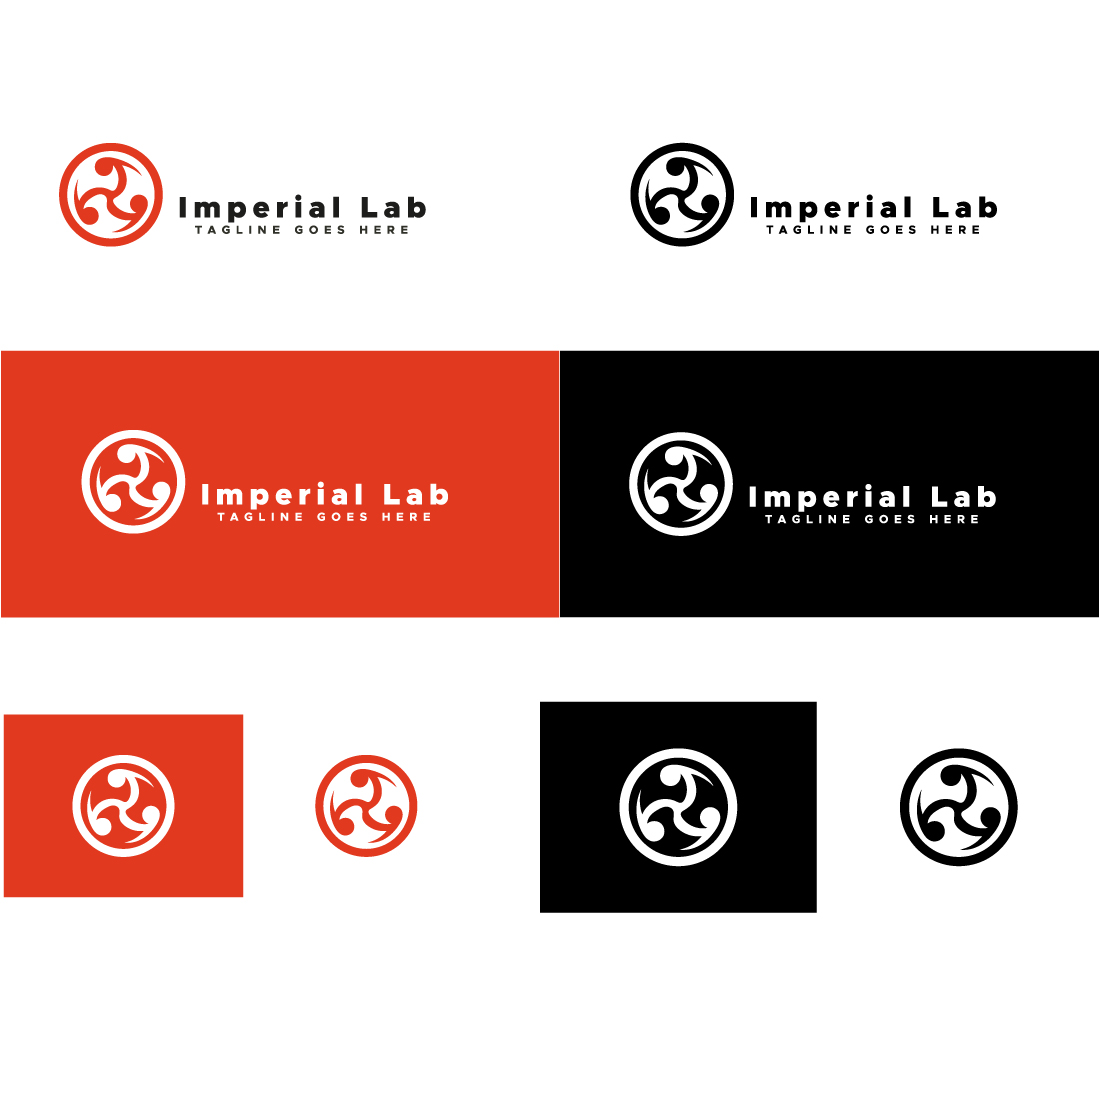 Imperial Lab Professional Logo Design Template Only 12$ cover image.